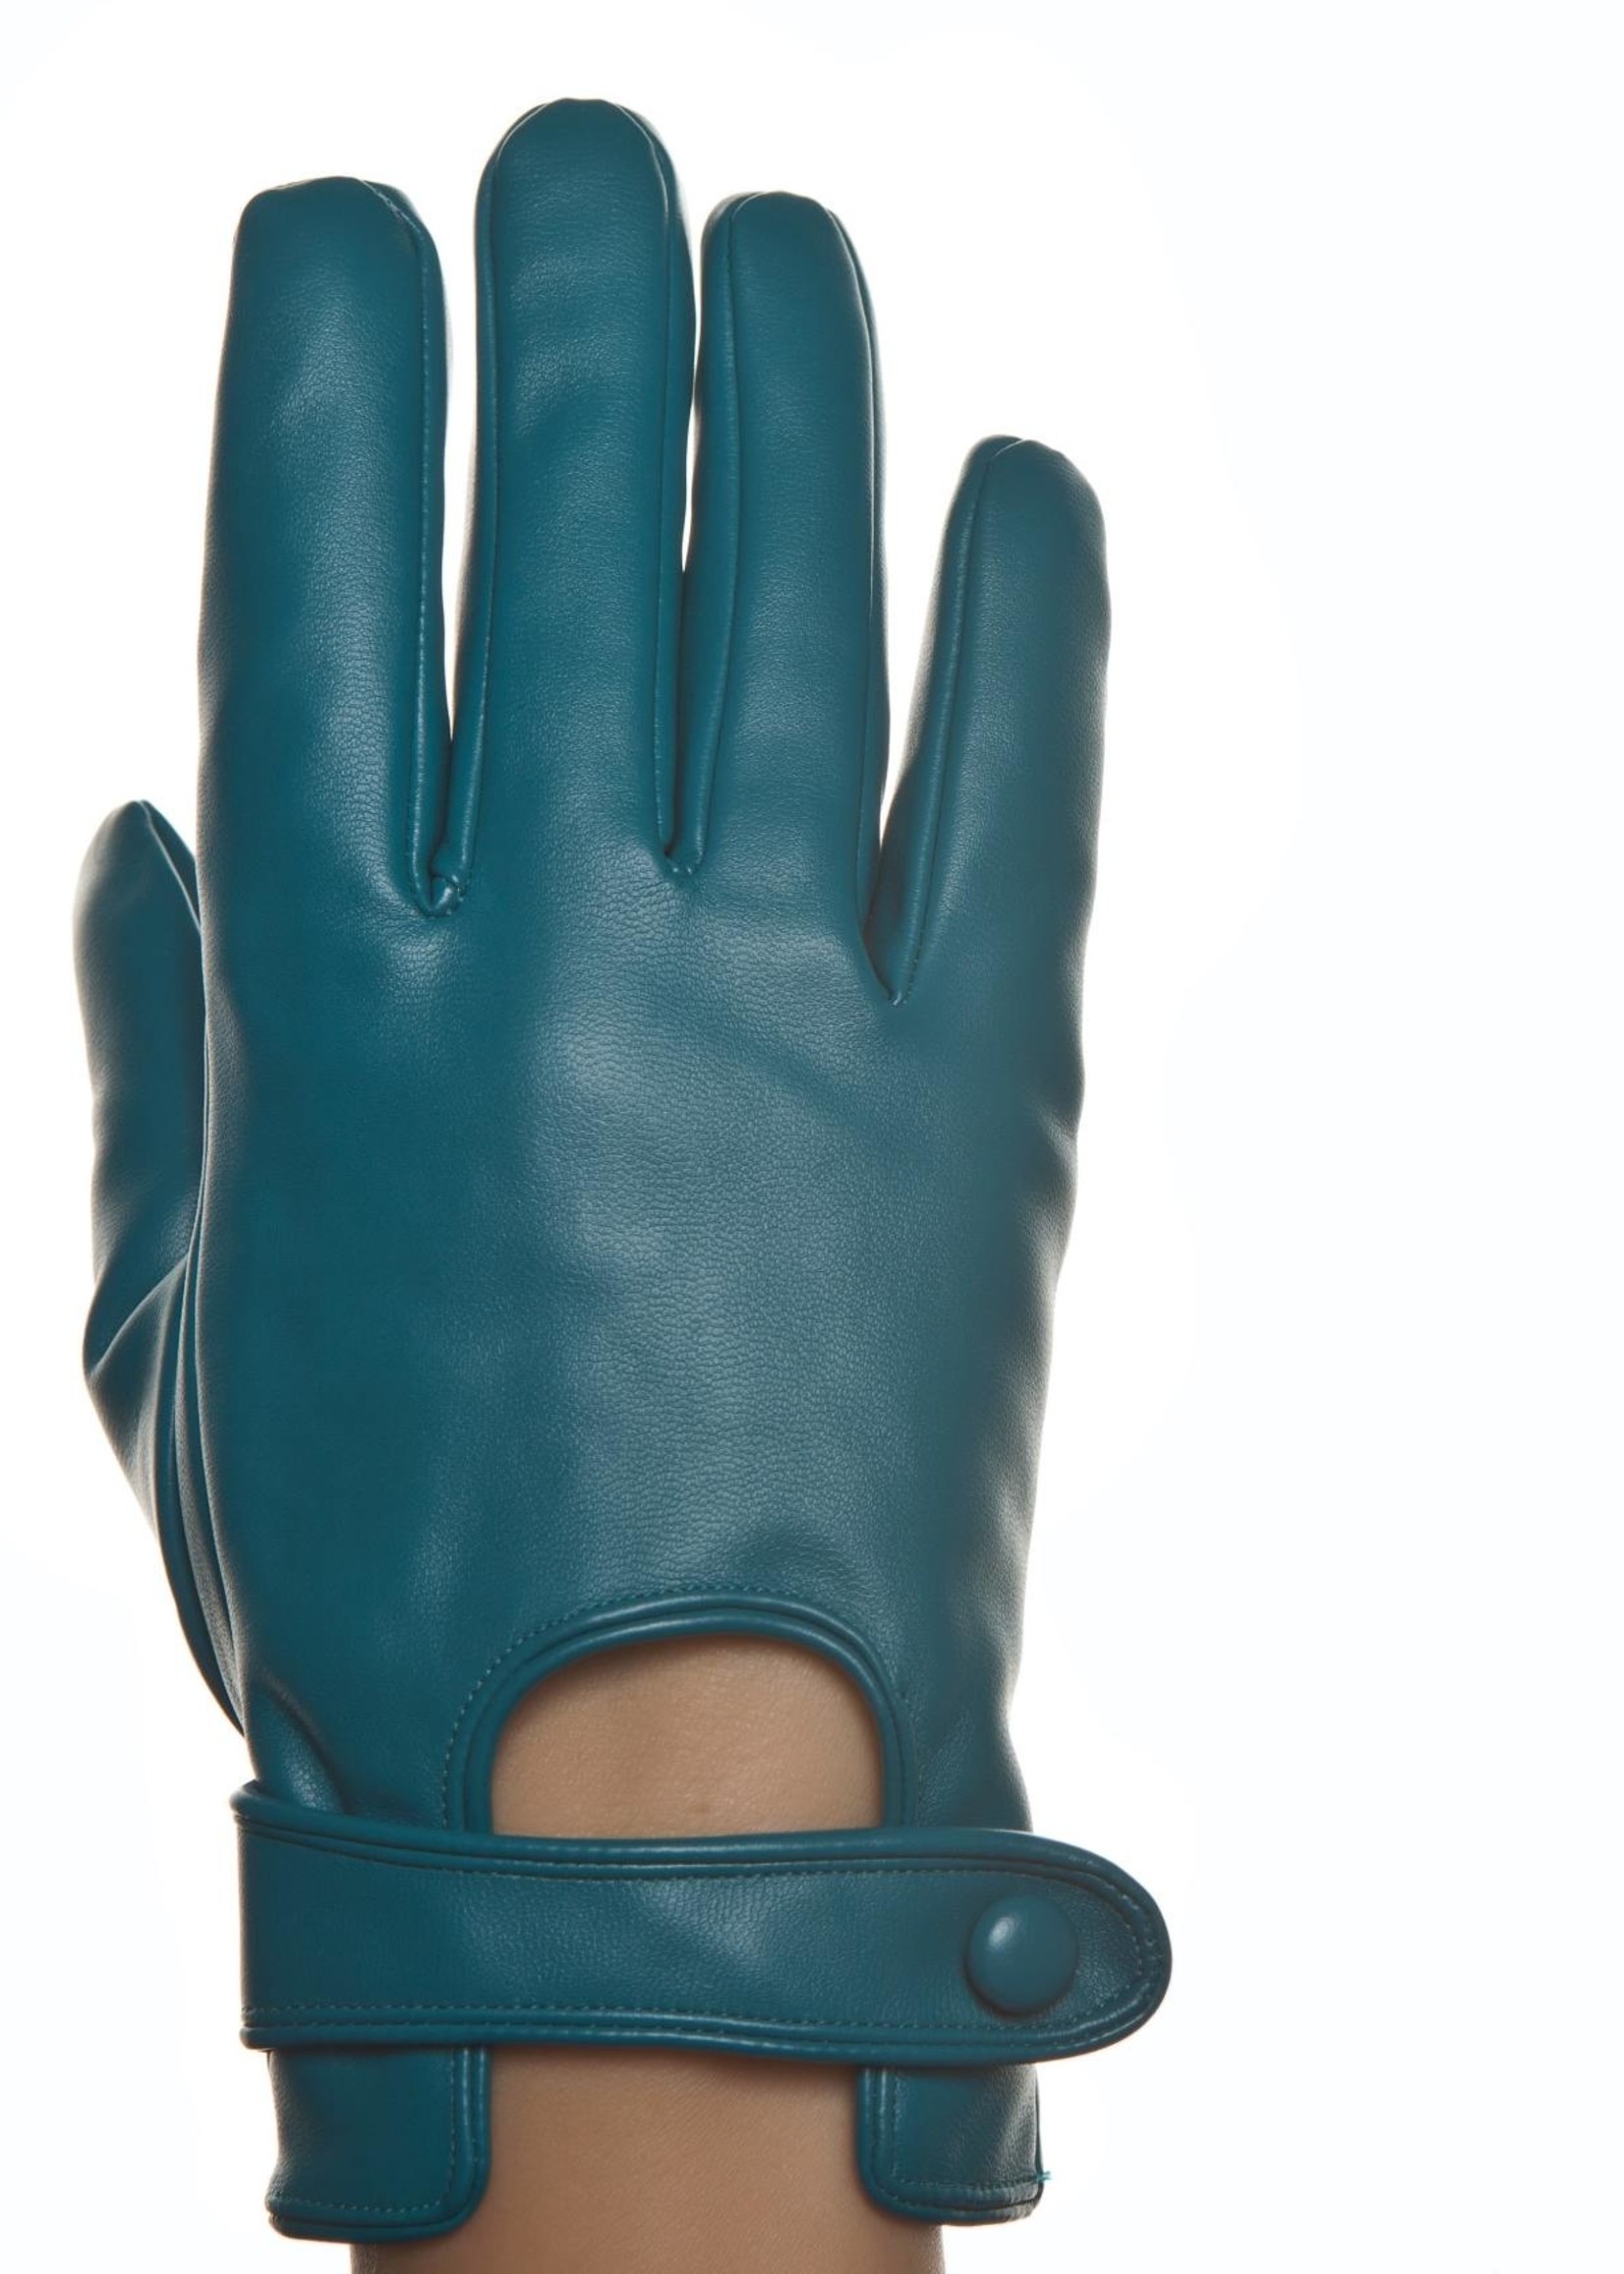 Blue leather gloves